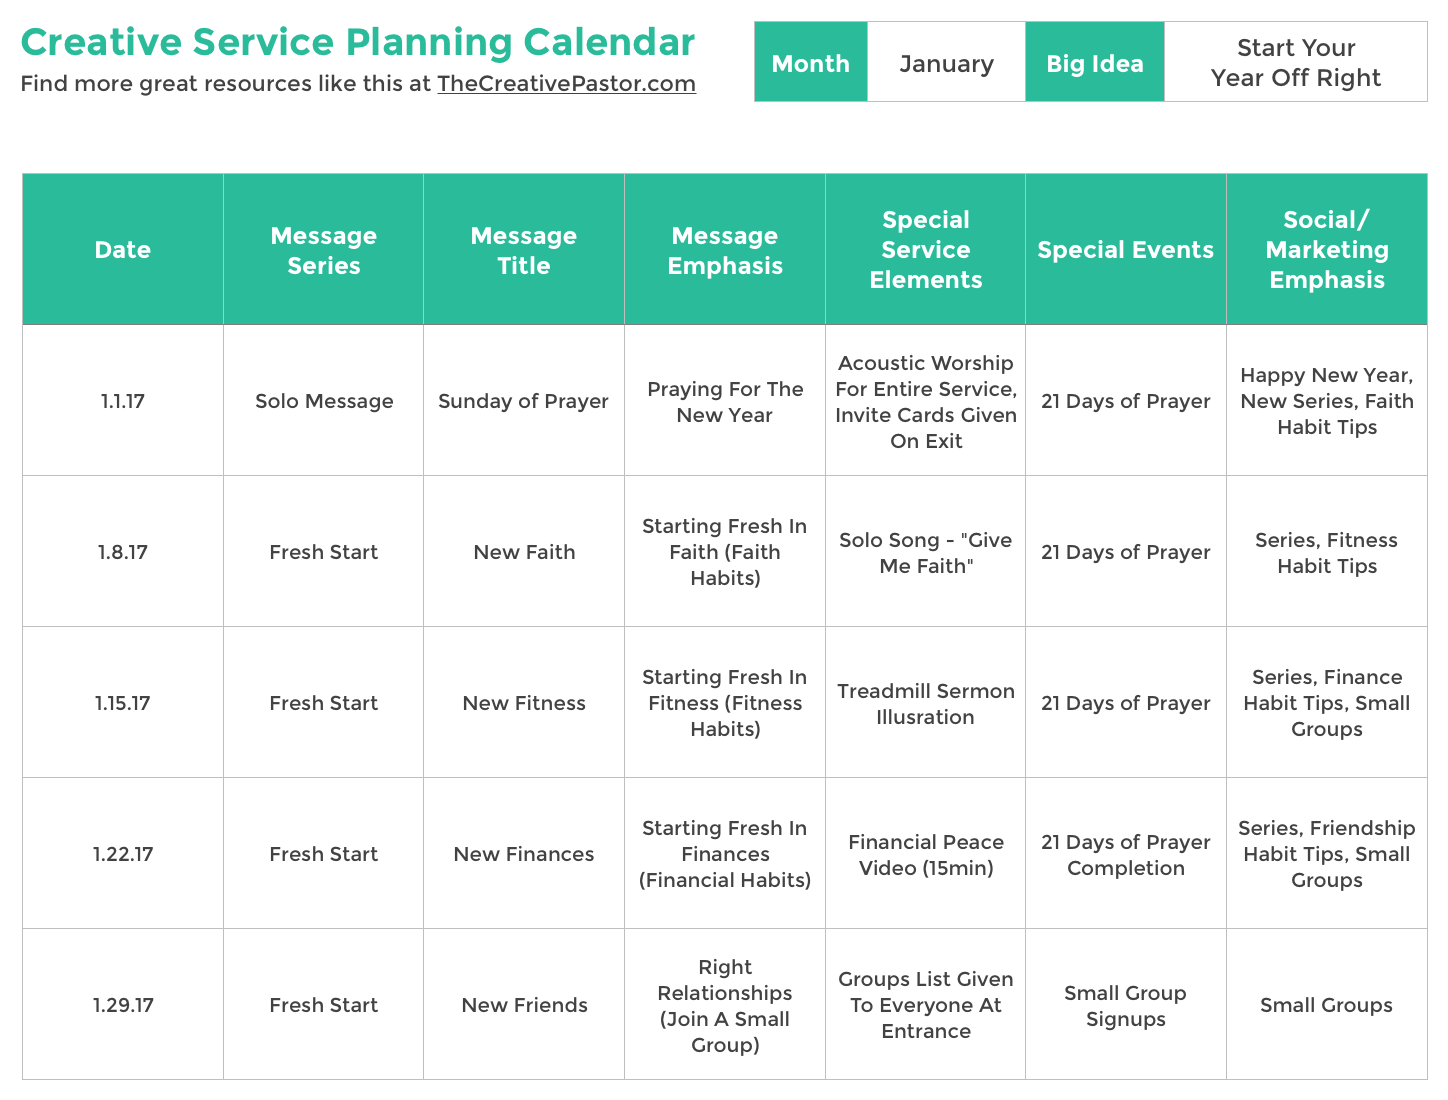 The Essential Planning Calendar Your Church Needs To Be Creative All Year Long